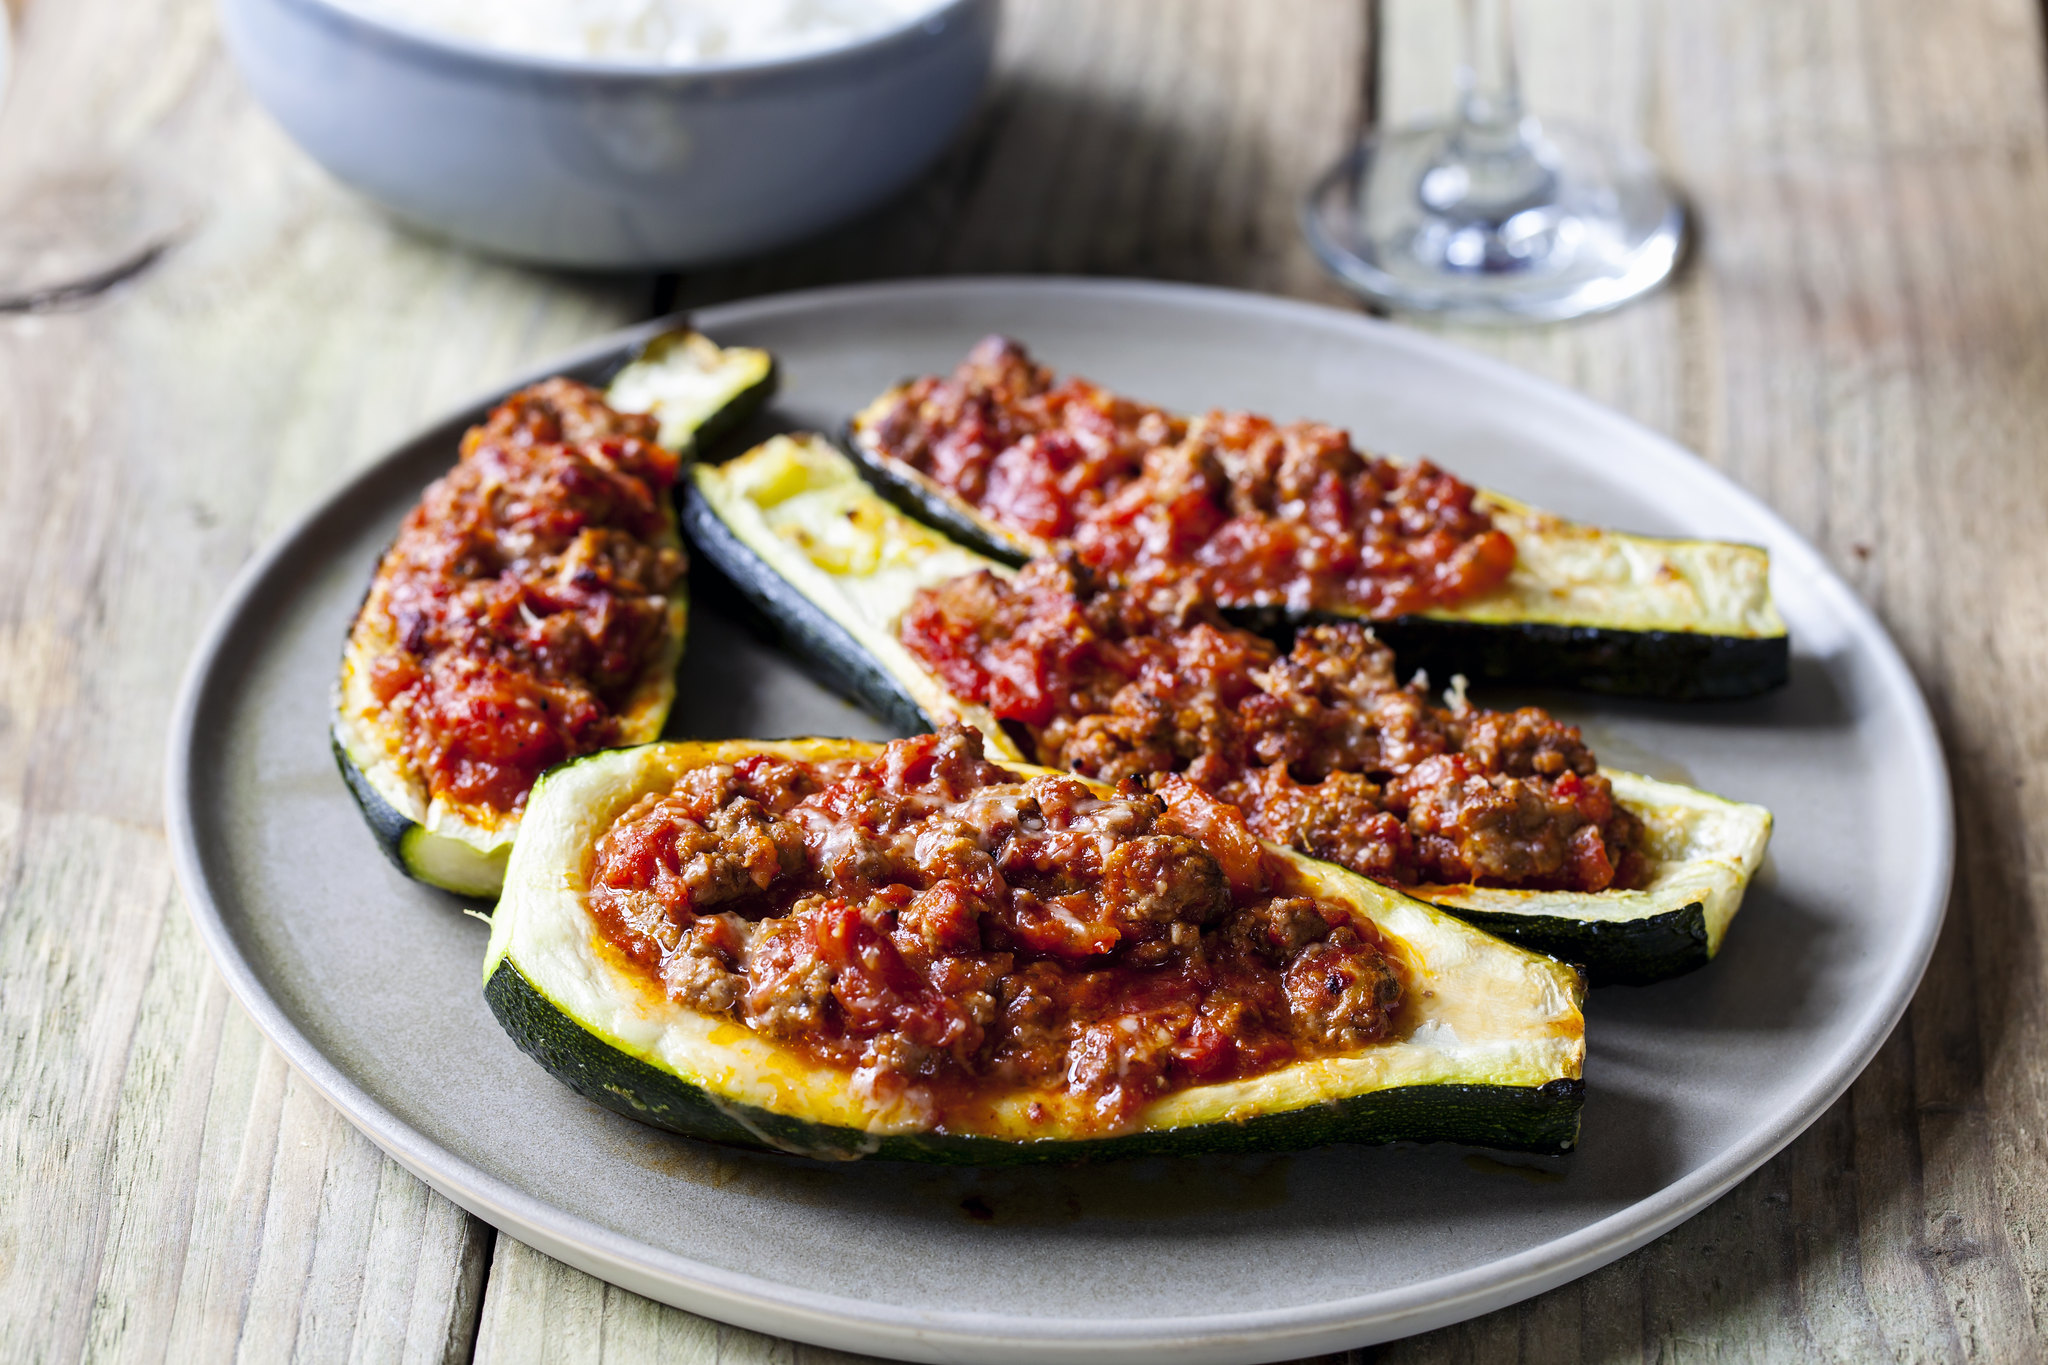 Courgettes with Spicy Lamb Mince